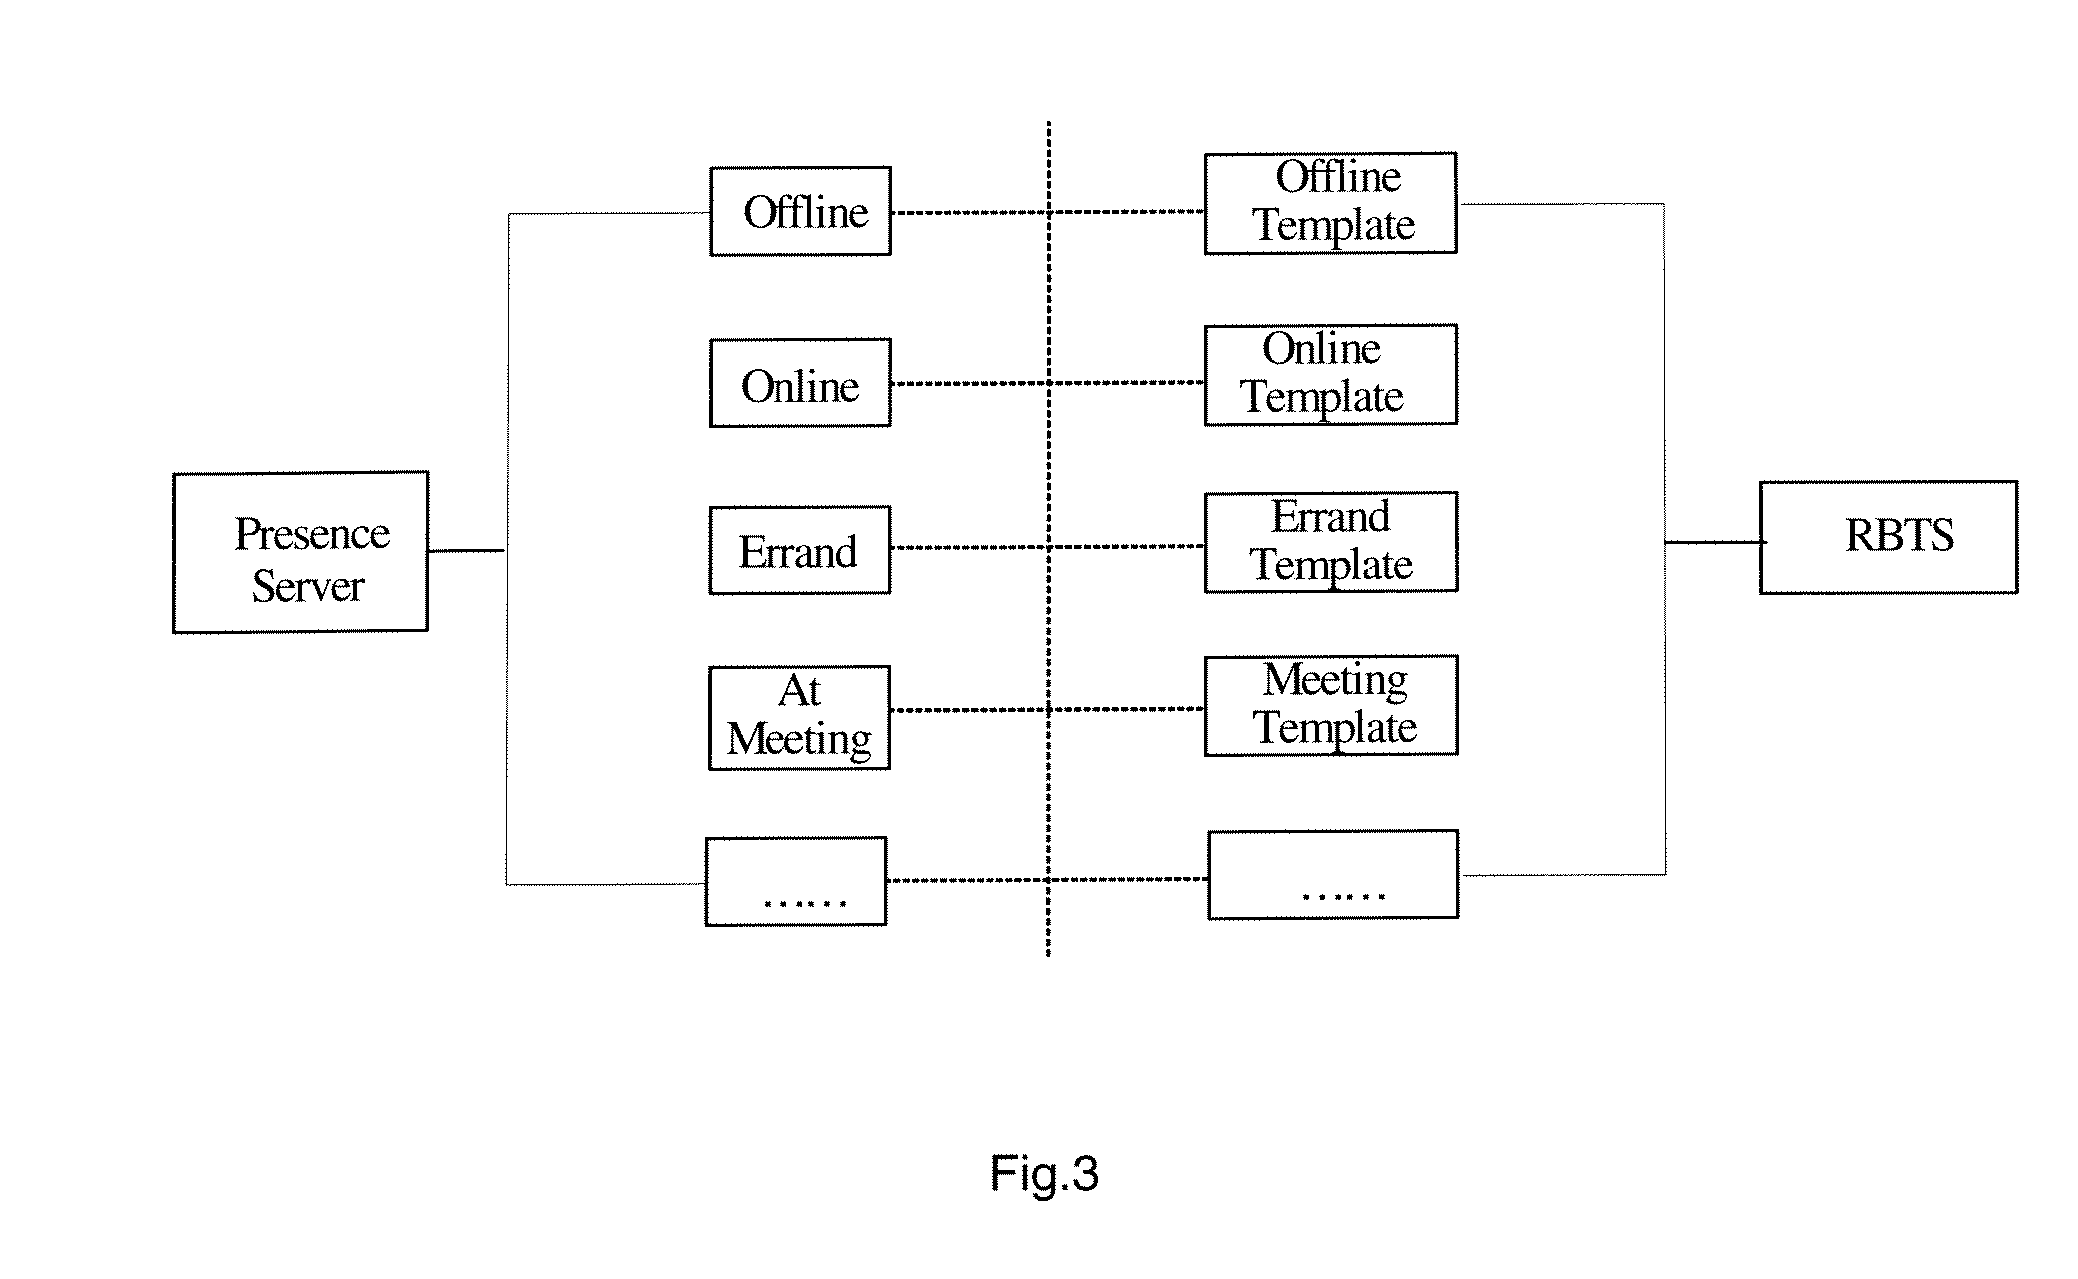 Method and system for providing presence information using ringback tone